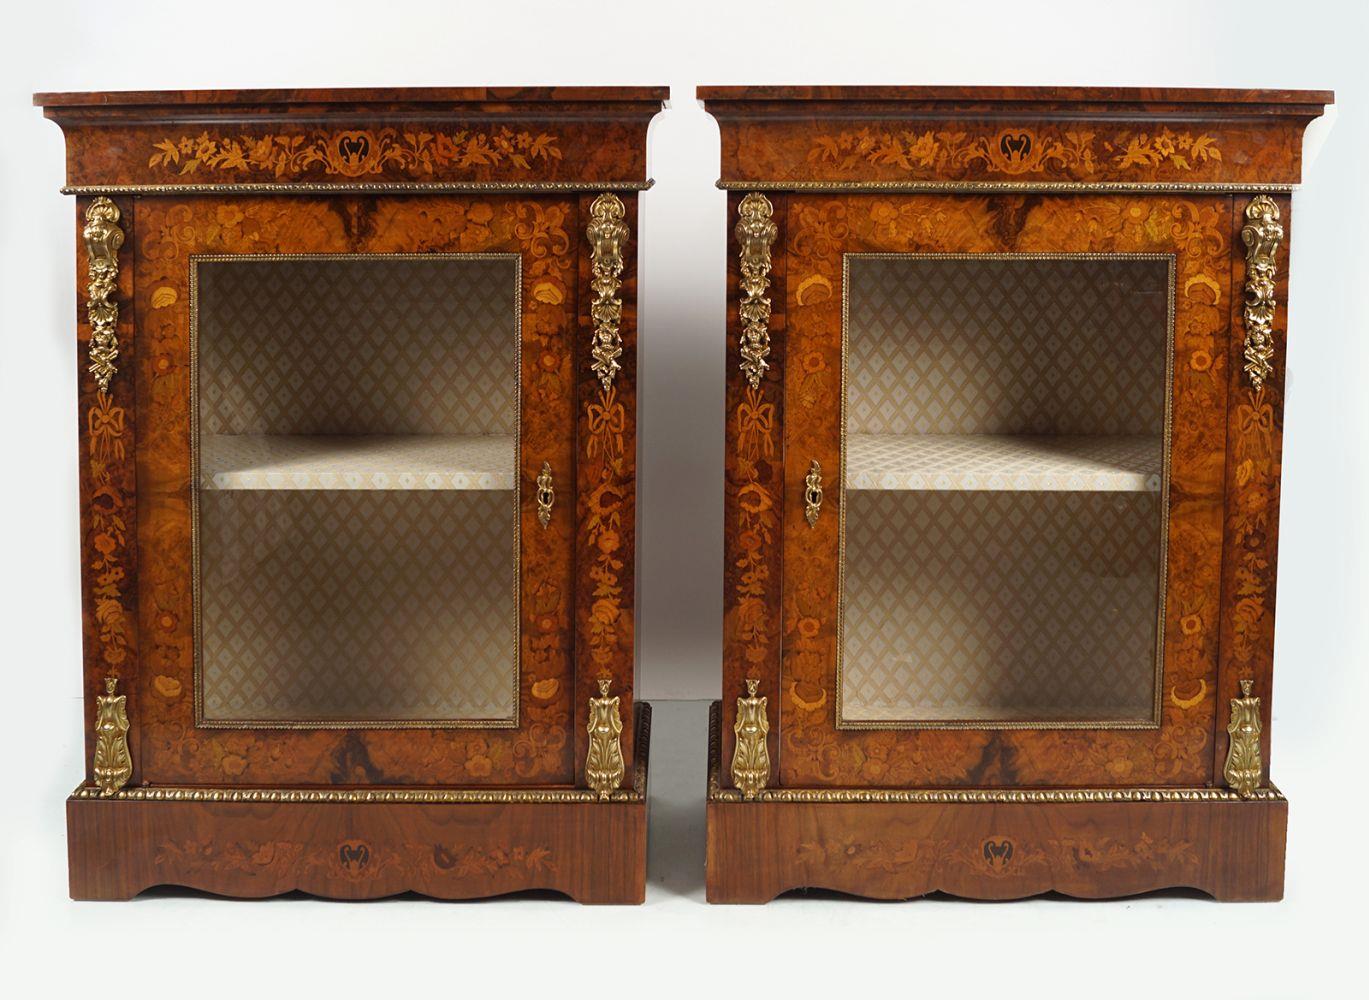 PAIR 19TH-CENTURY WALNUT & MARQUETRY CABINETS